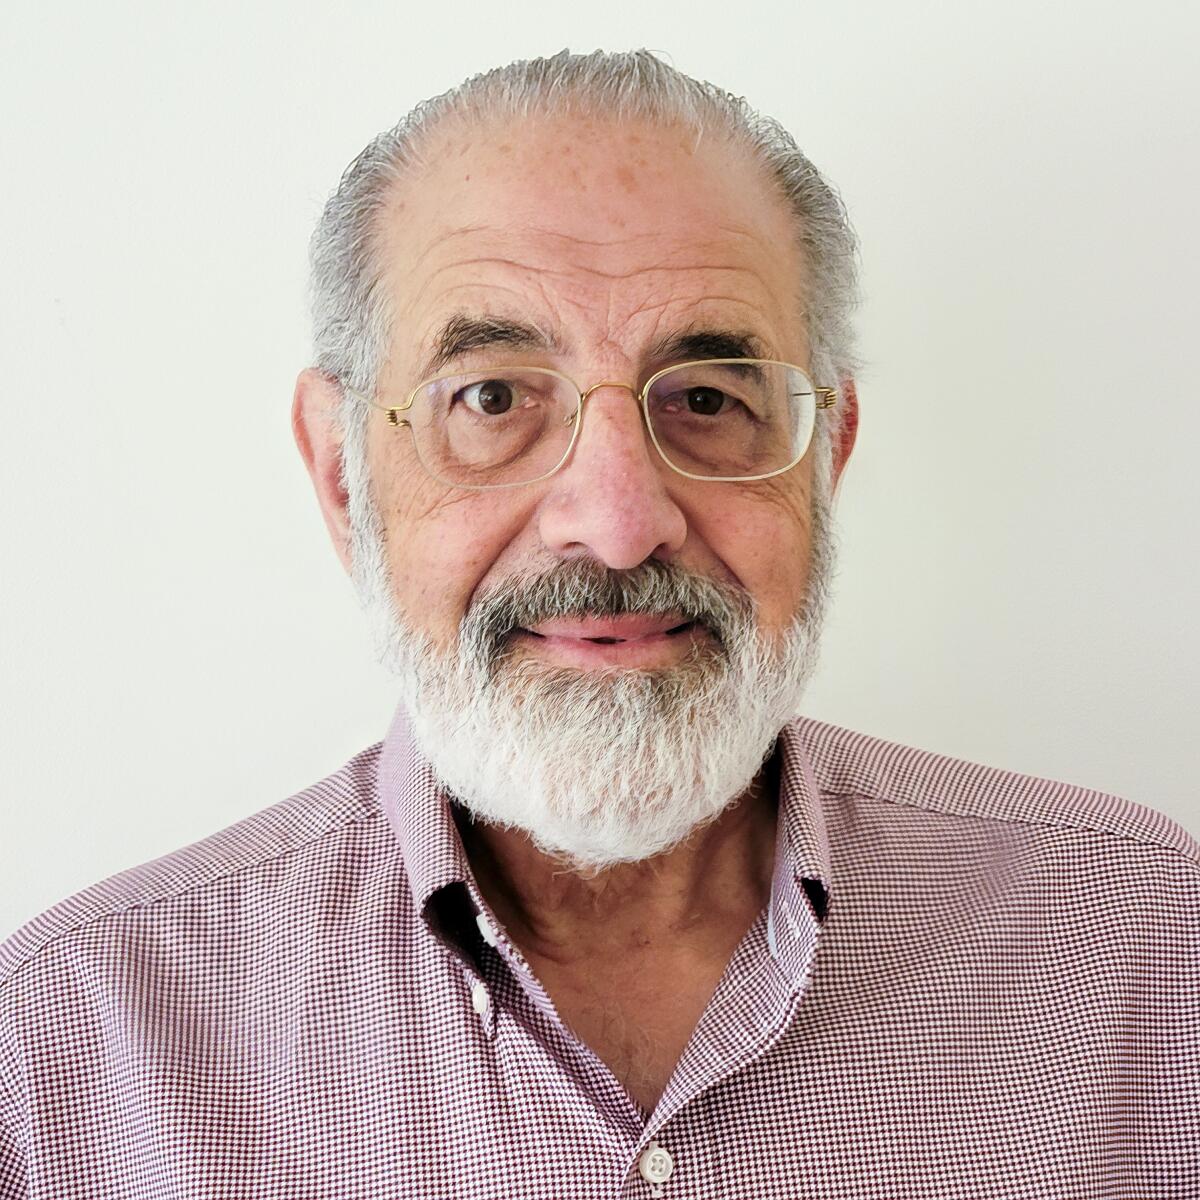 A man with a beard and eyeglasses, pictured from the shoulders up